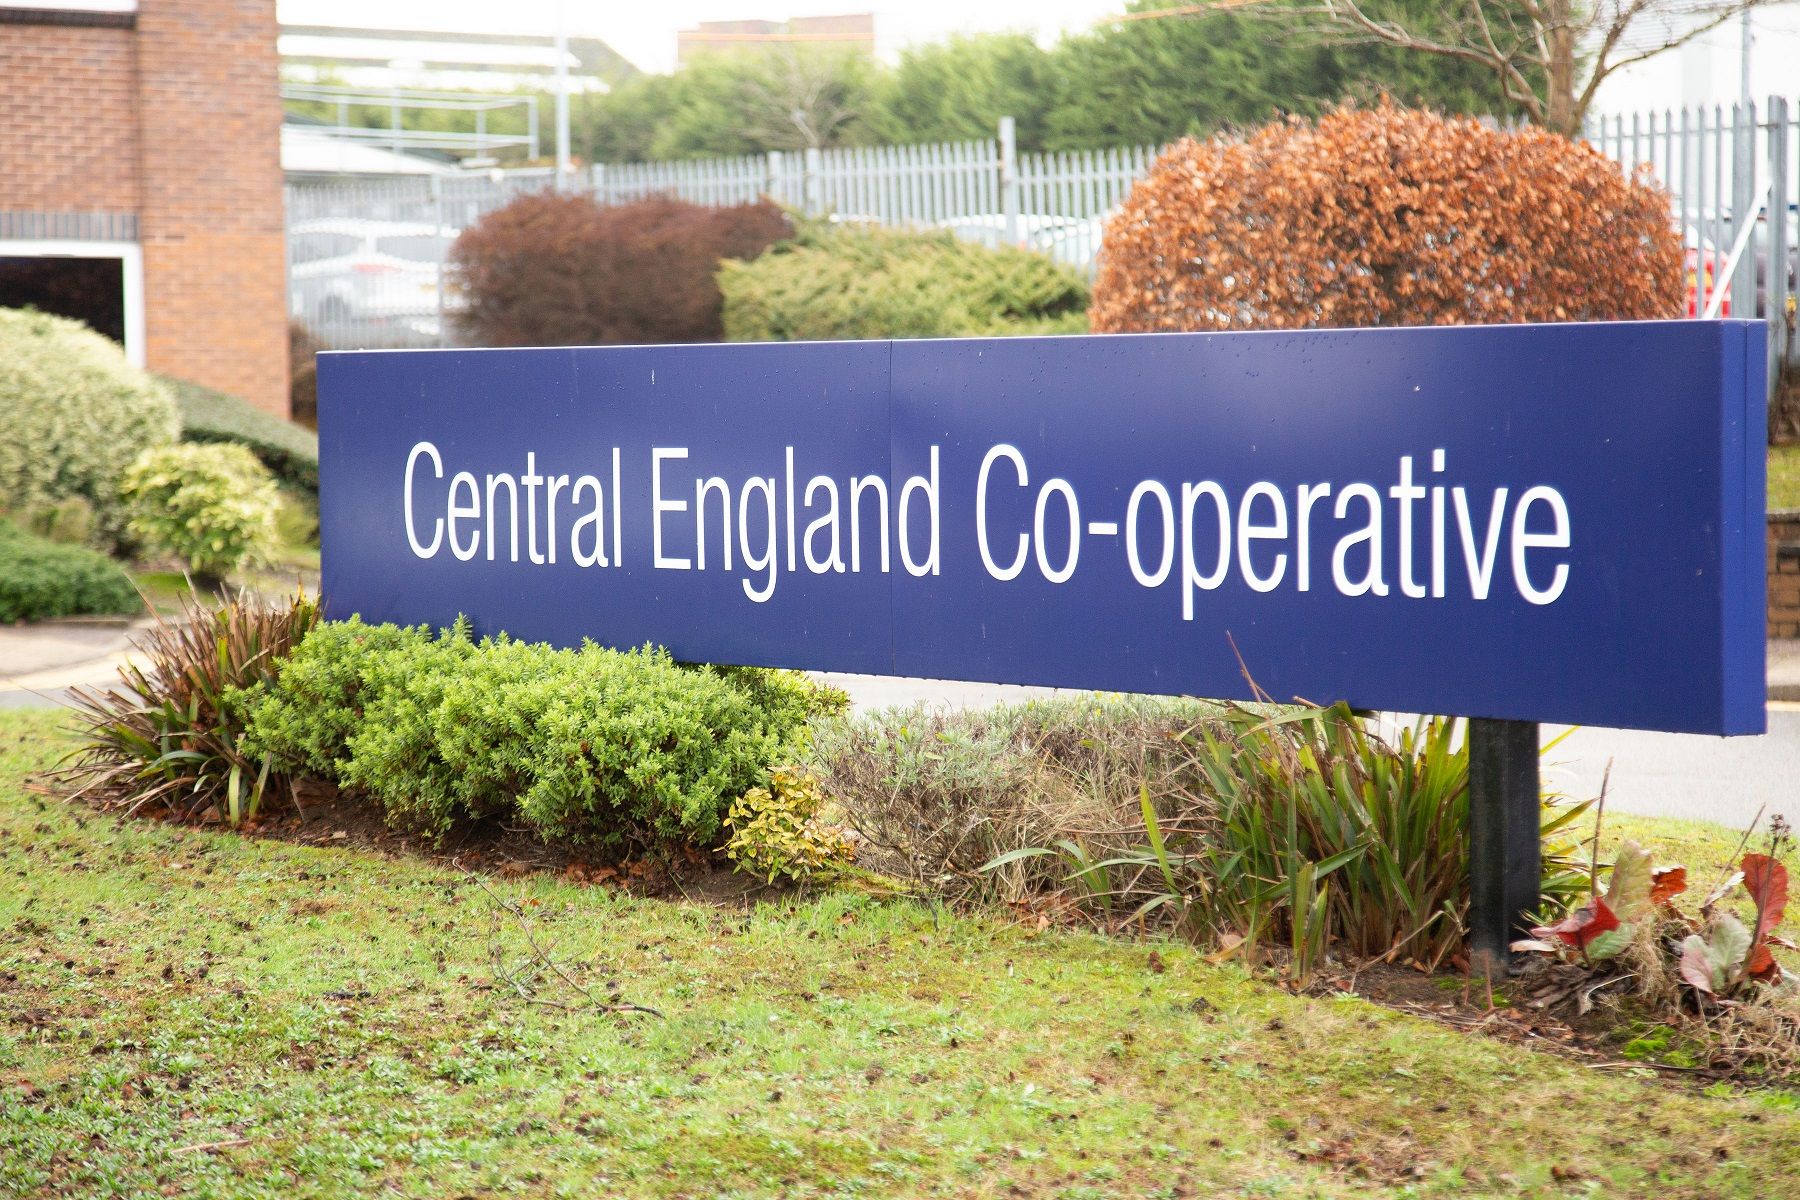 Help us win Leading Co-operative of the Year 2019